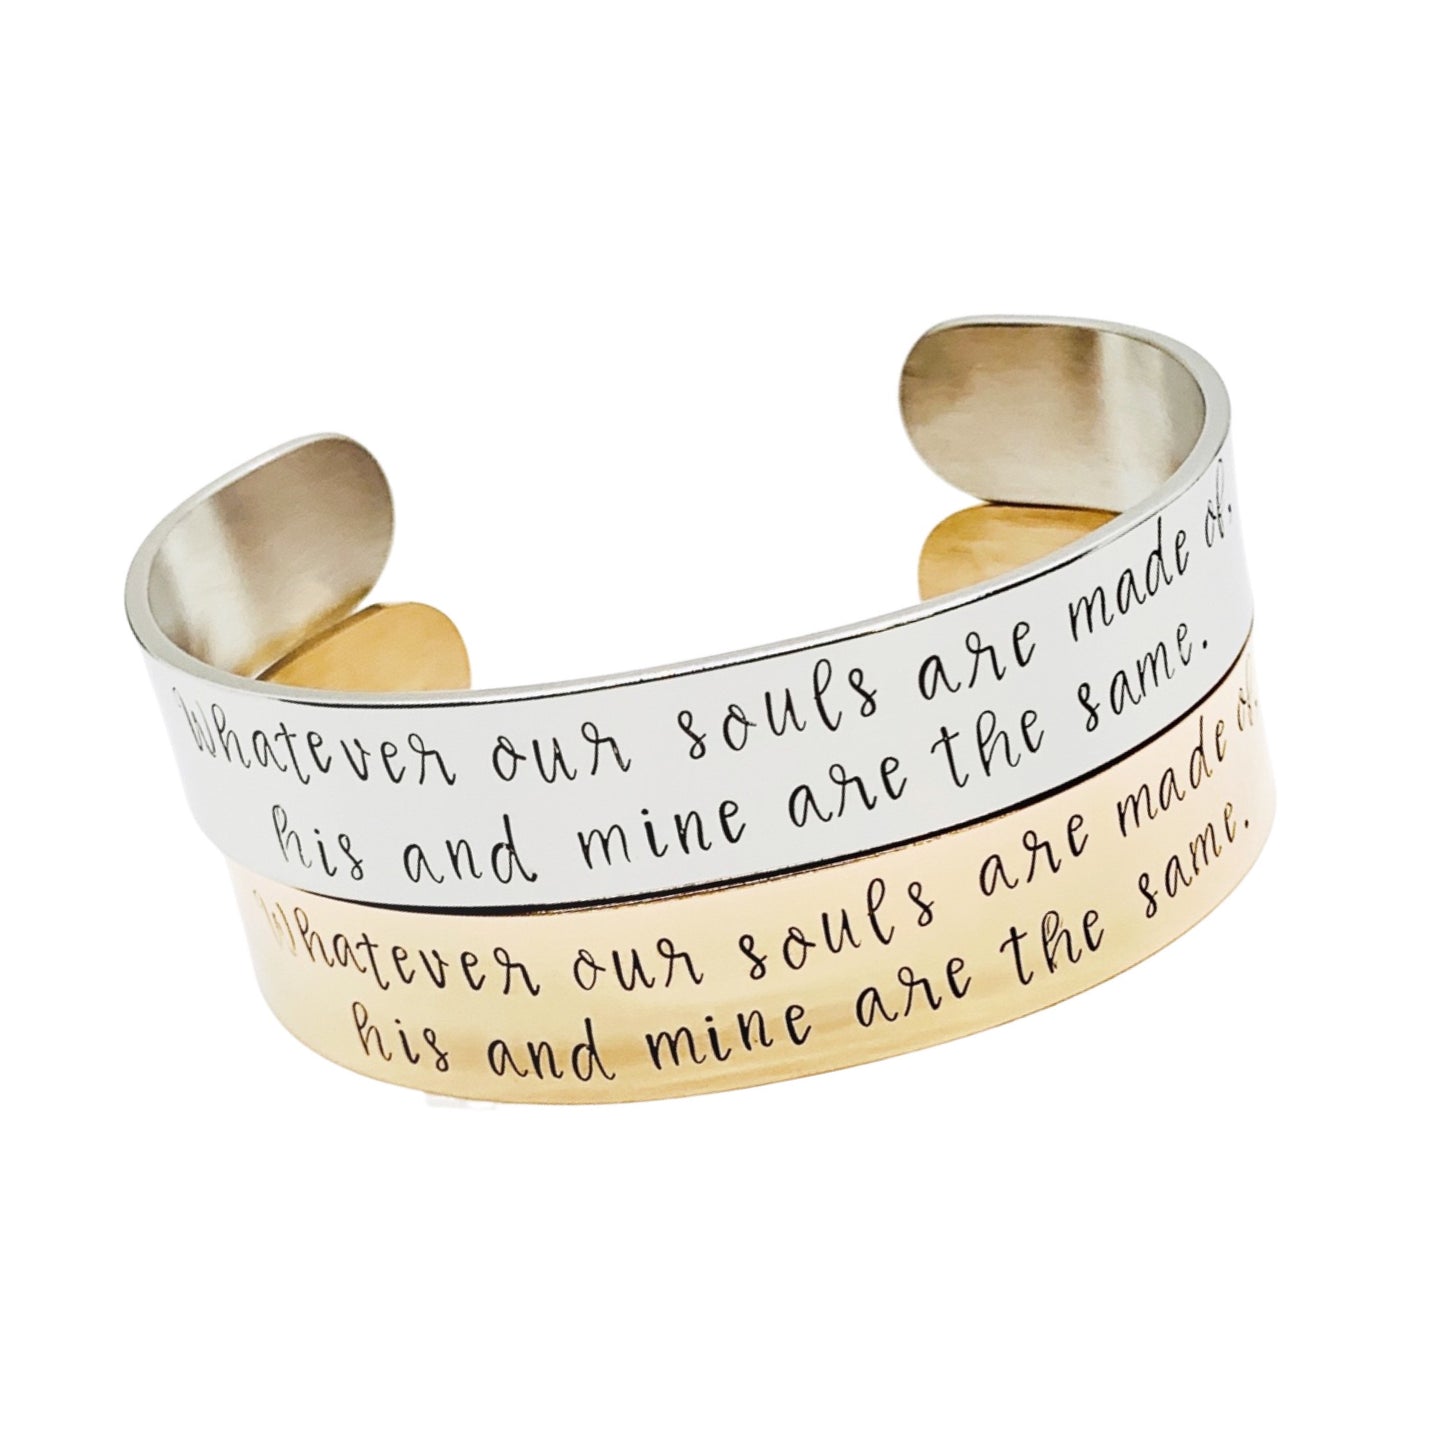 Whatever our souls are made of, his and mine are the same - Cuff Bracelet